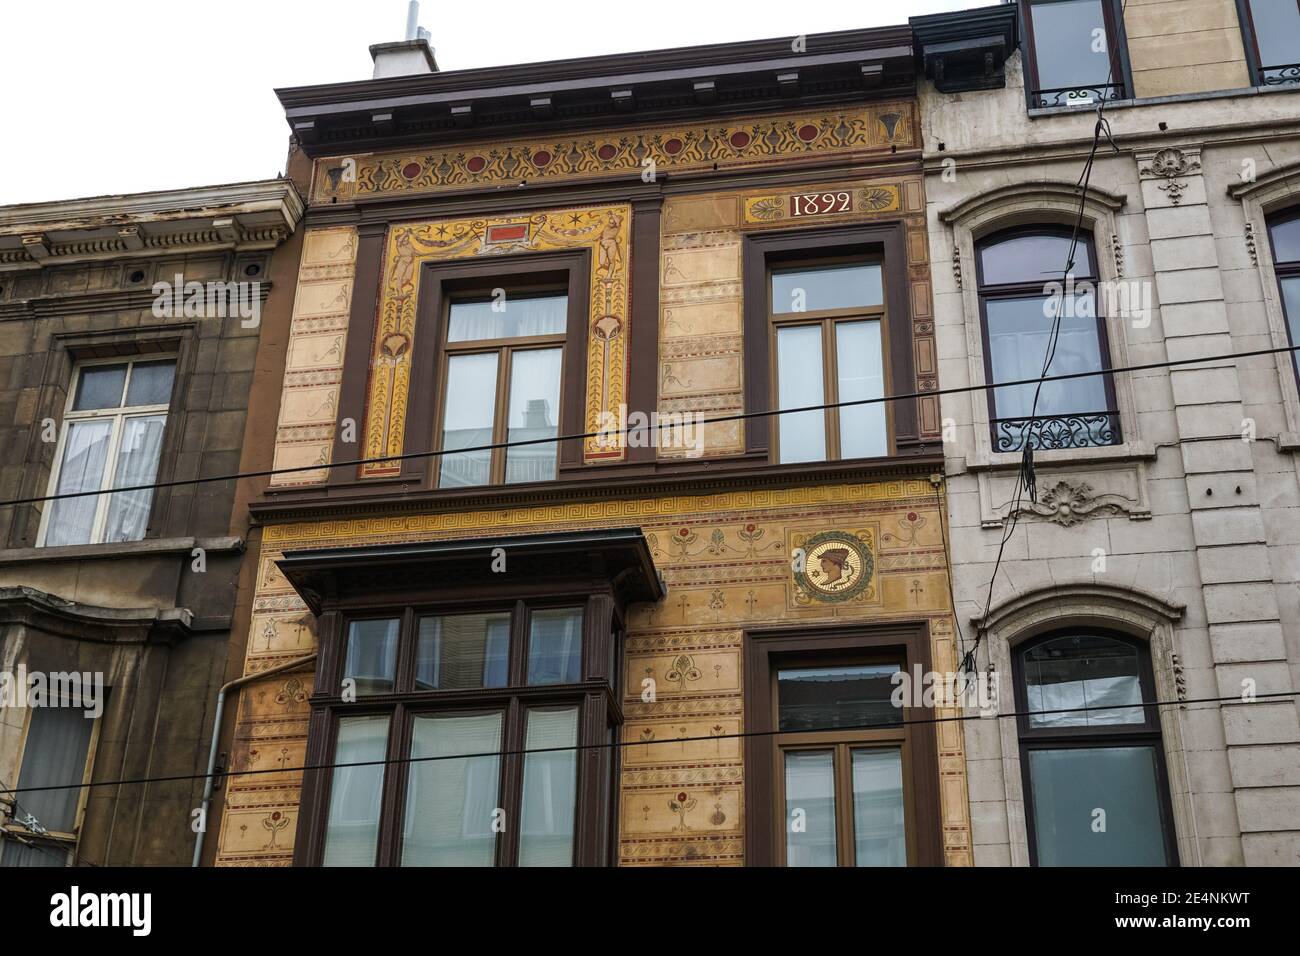 Facade of Art Nouveau style house in Brussels, Belgium Stock Photo